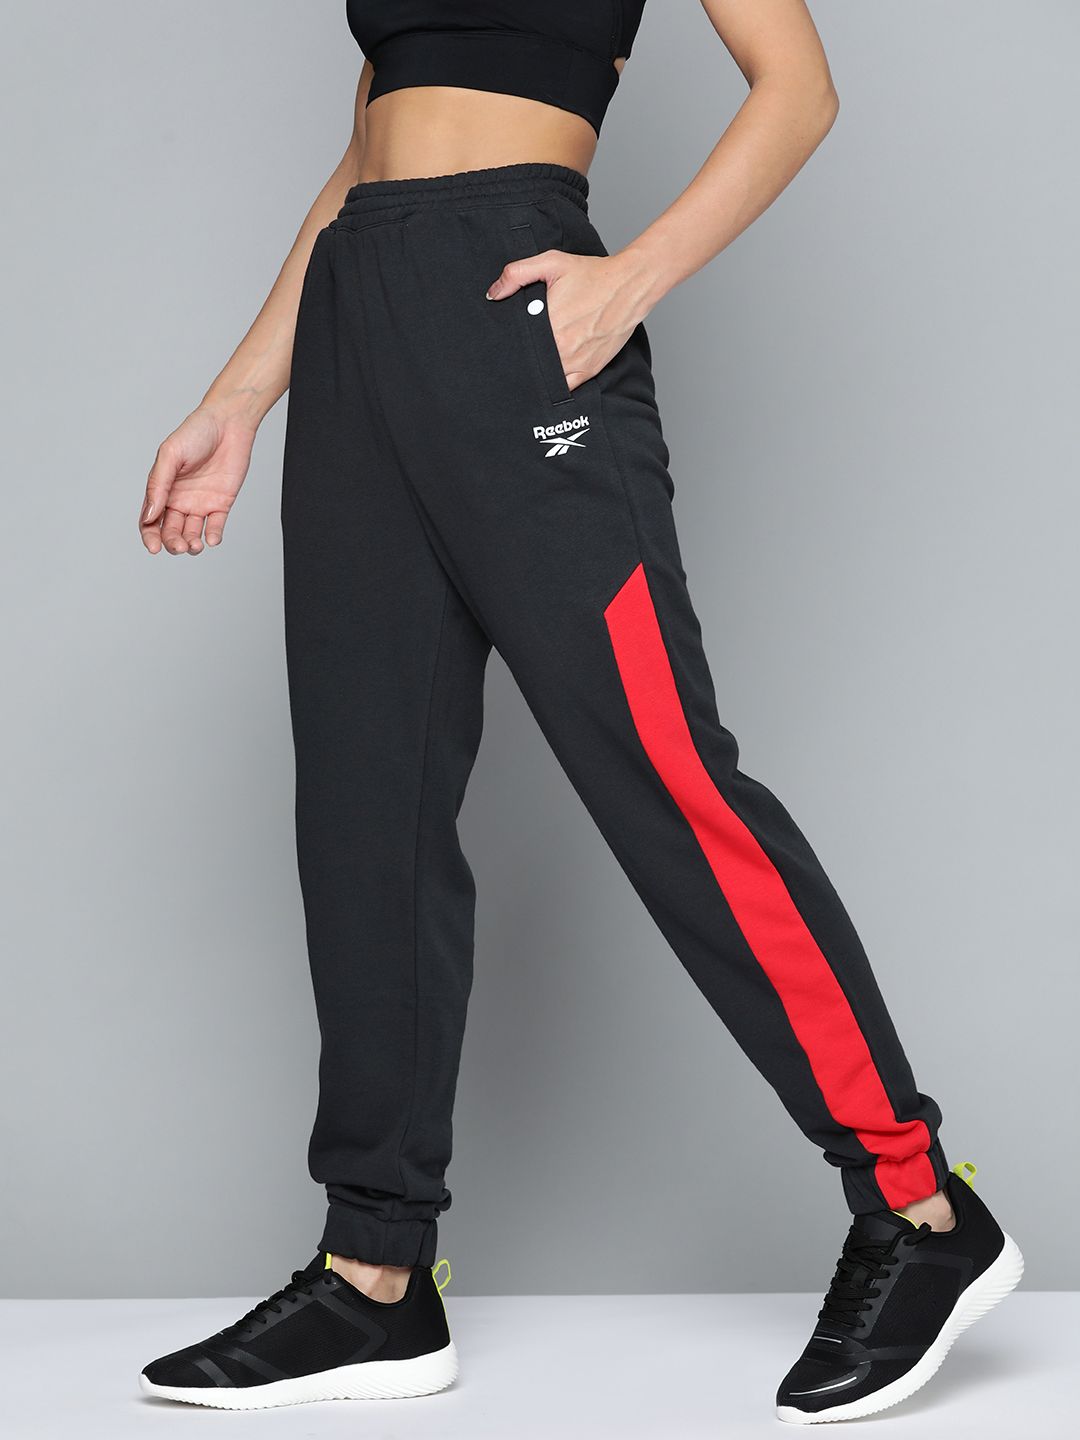 Reebok Classic Women Black & Red Colorblocked Joggers Price in India